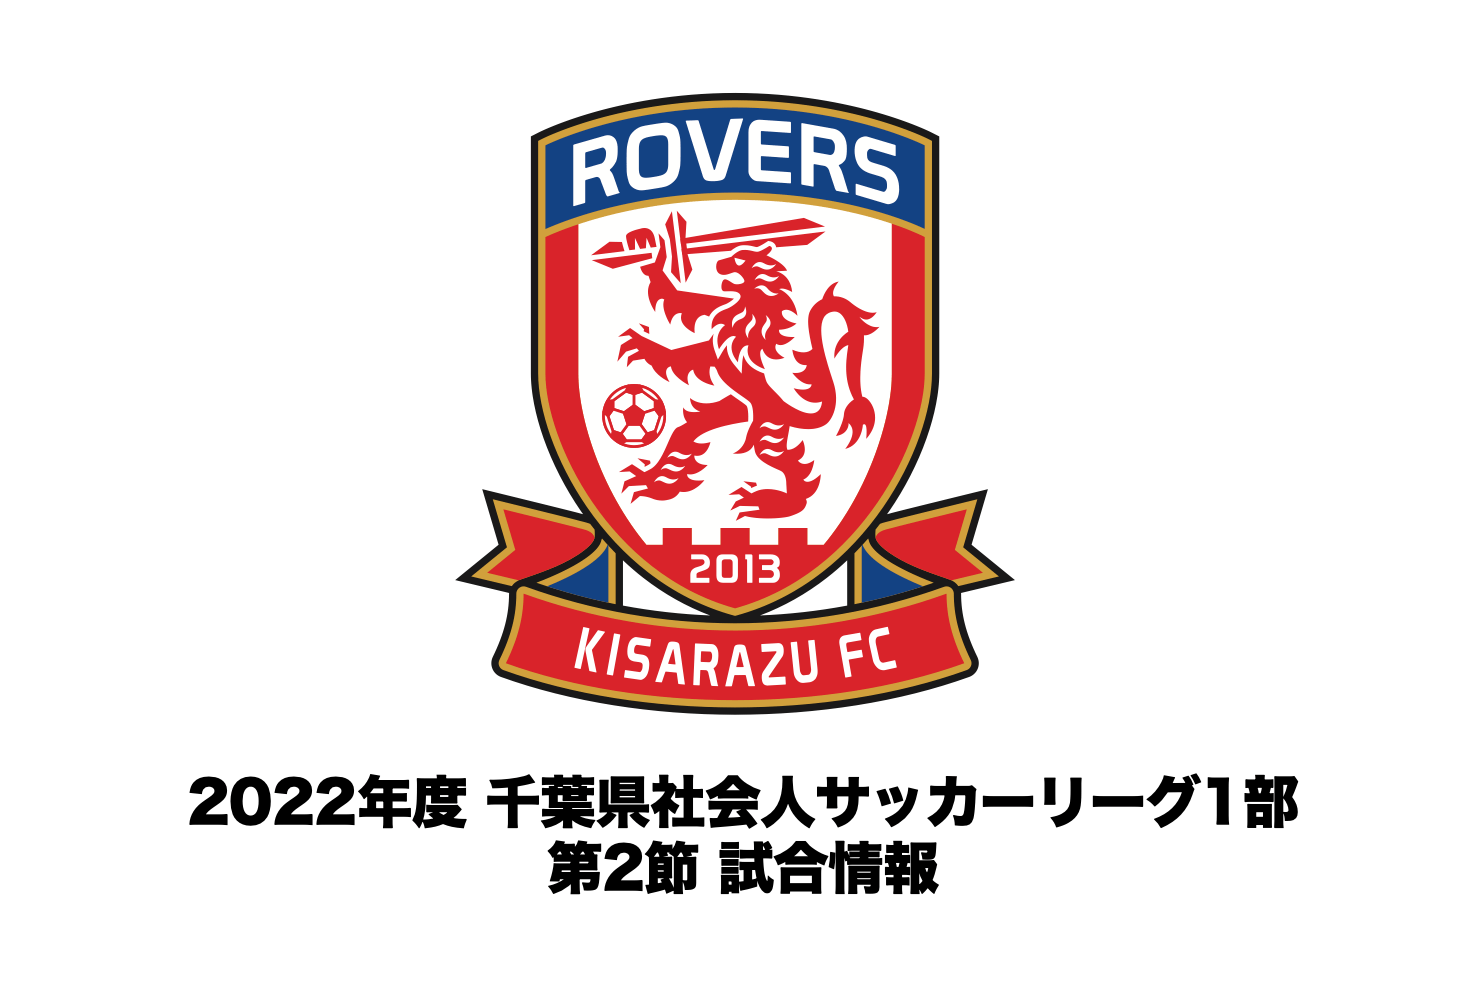 You are currently viewing 【試合情報】2022年度 千葉県社会人サッカーリーグ1部 第2節について